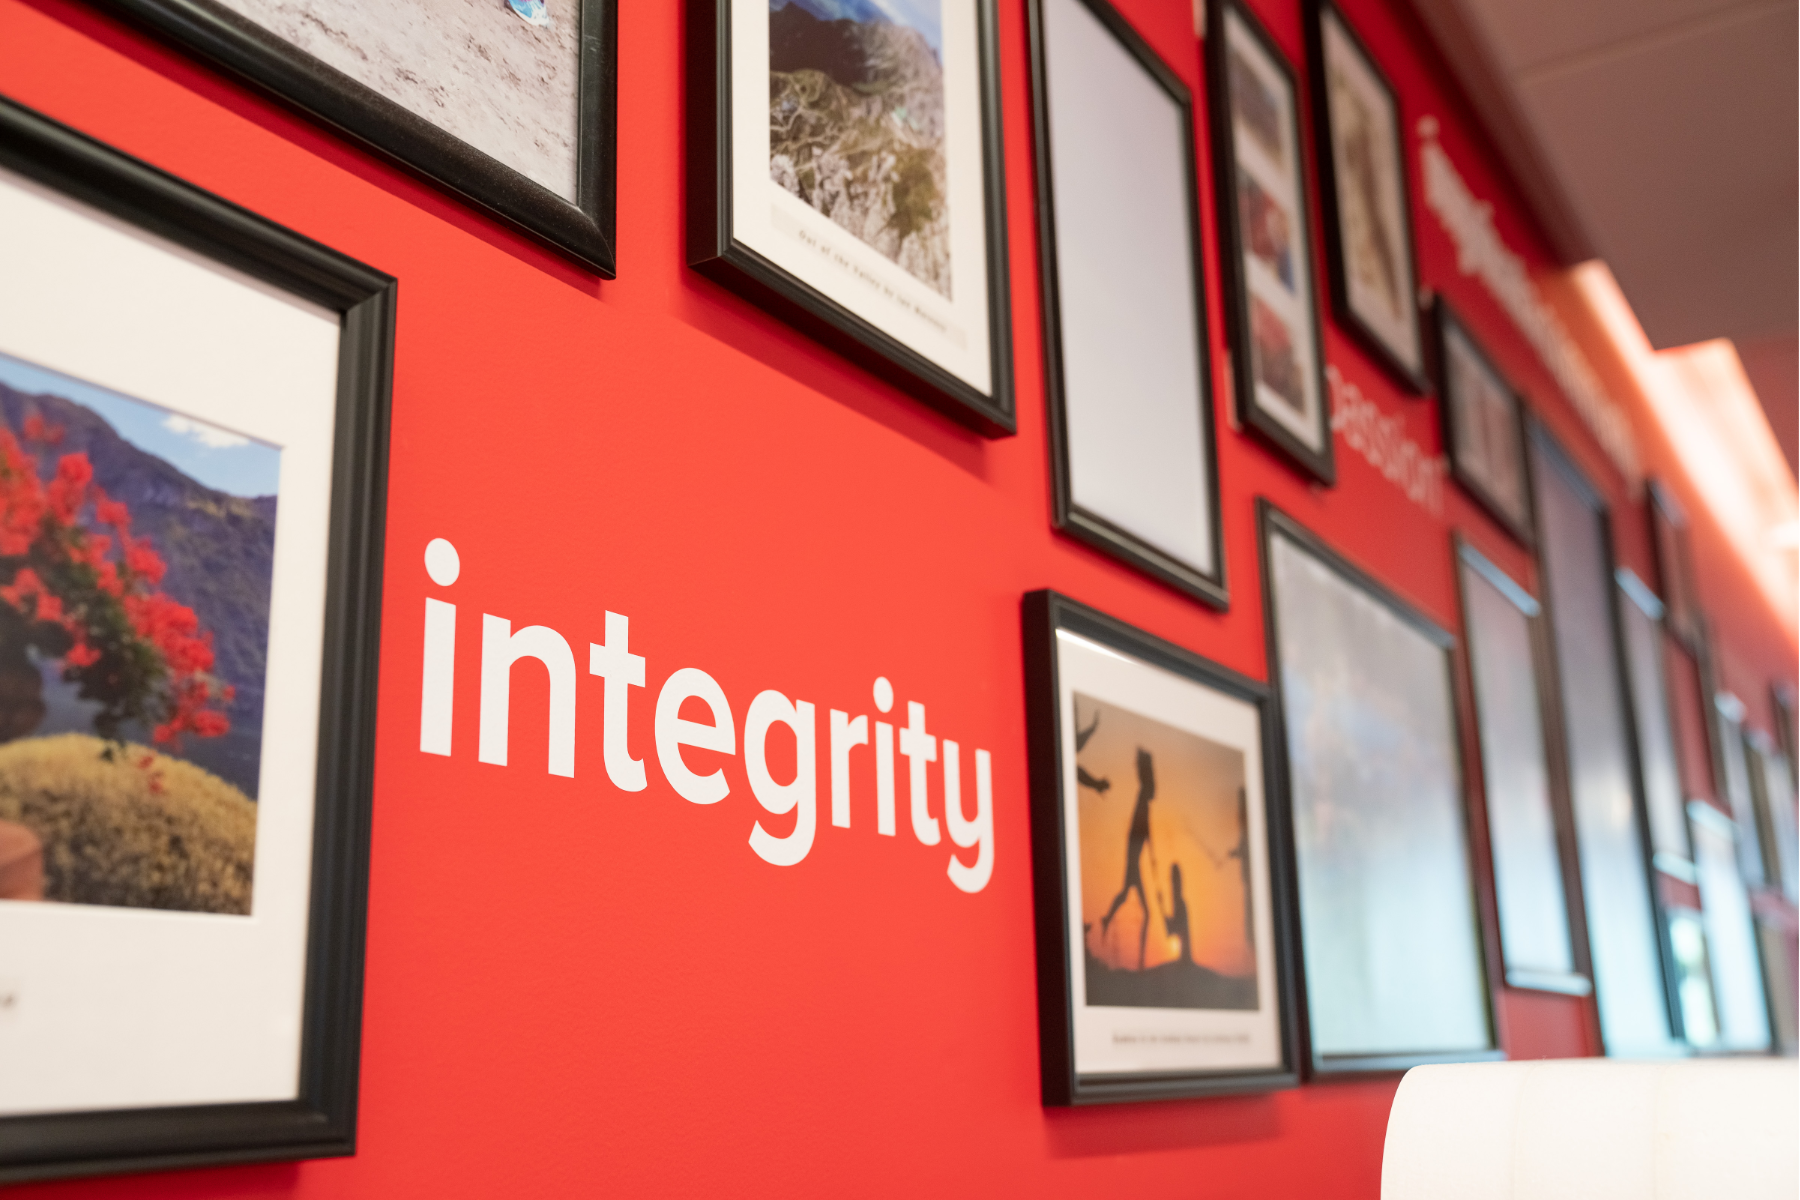 Image of a wall with the word 'integrity' painted on it surrounded by several framed photographs 